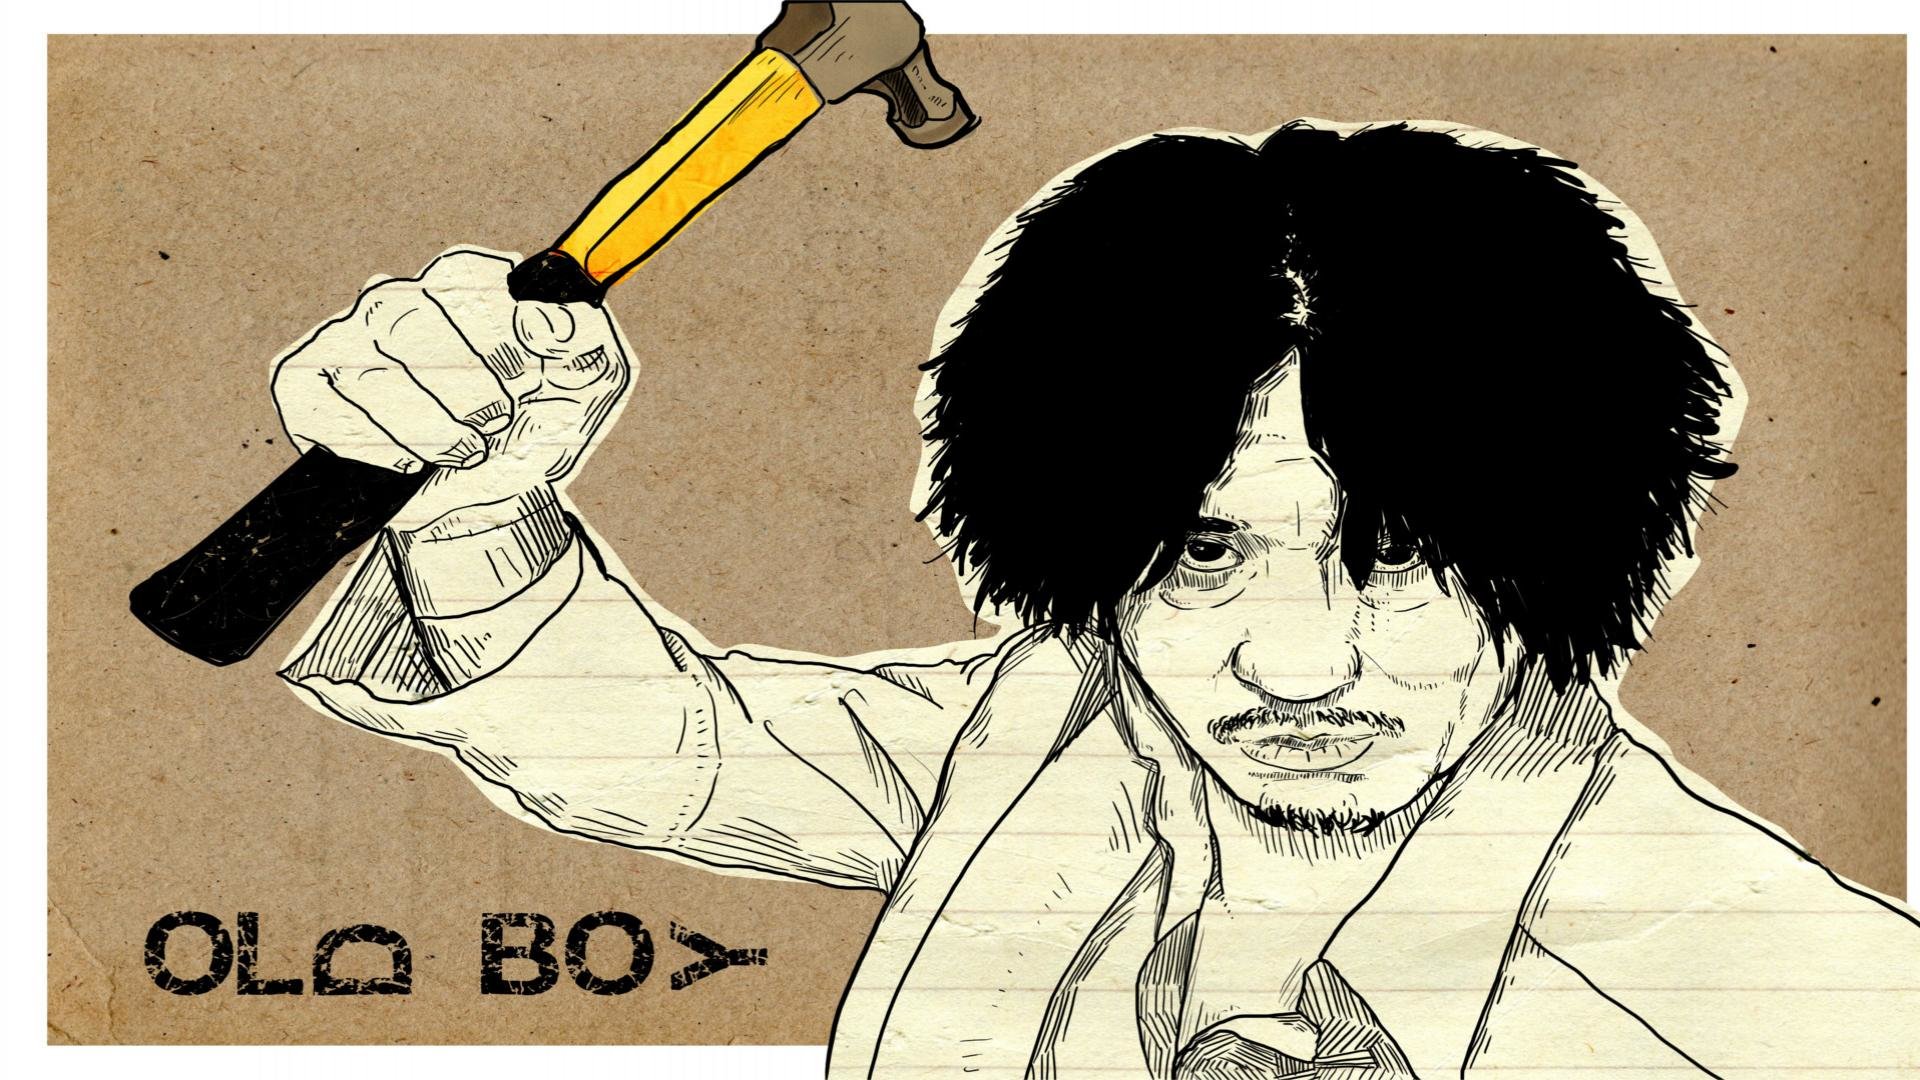 Download 1080p Oldboy PC background ID:352471 for free